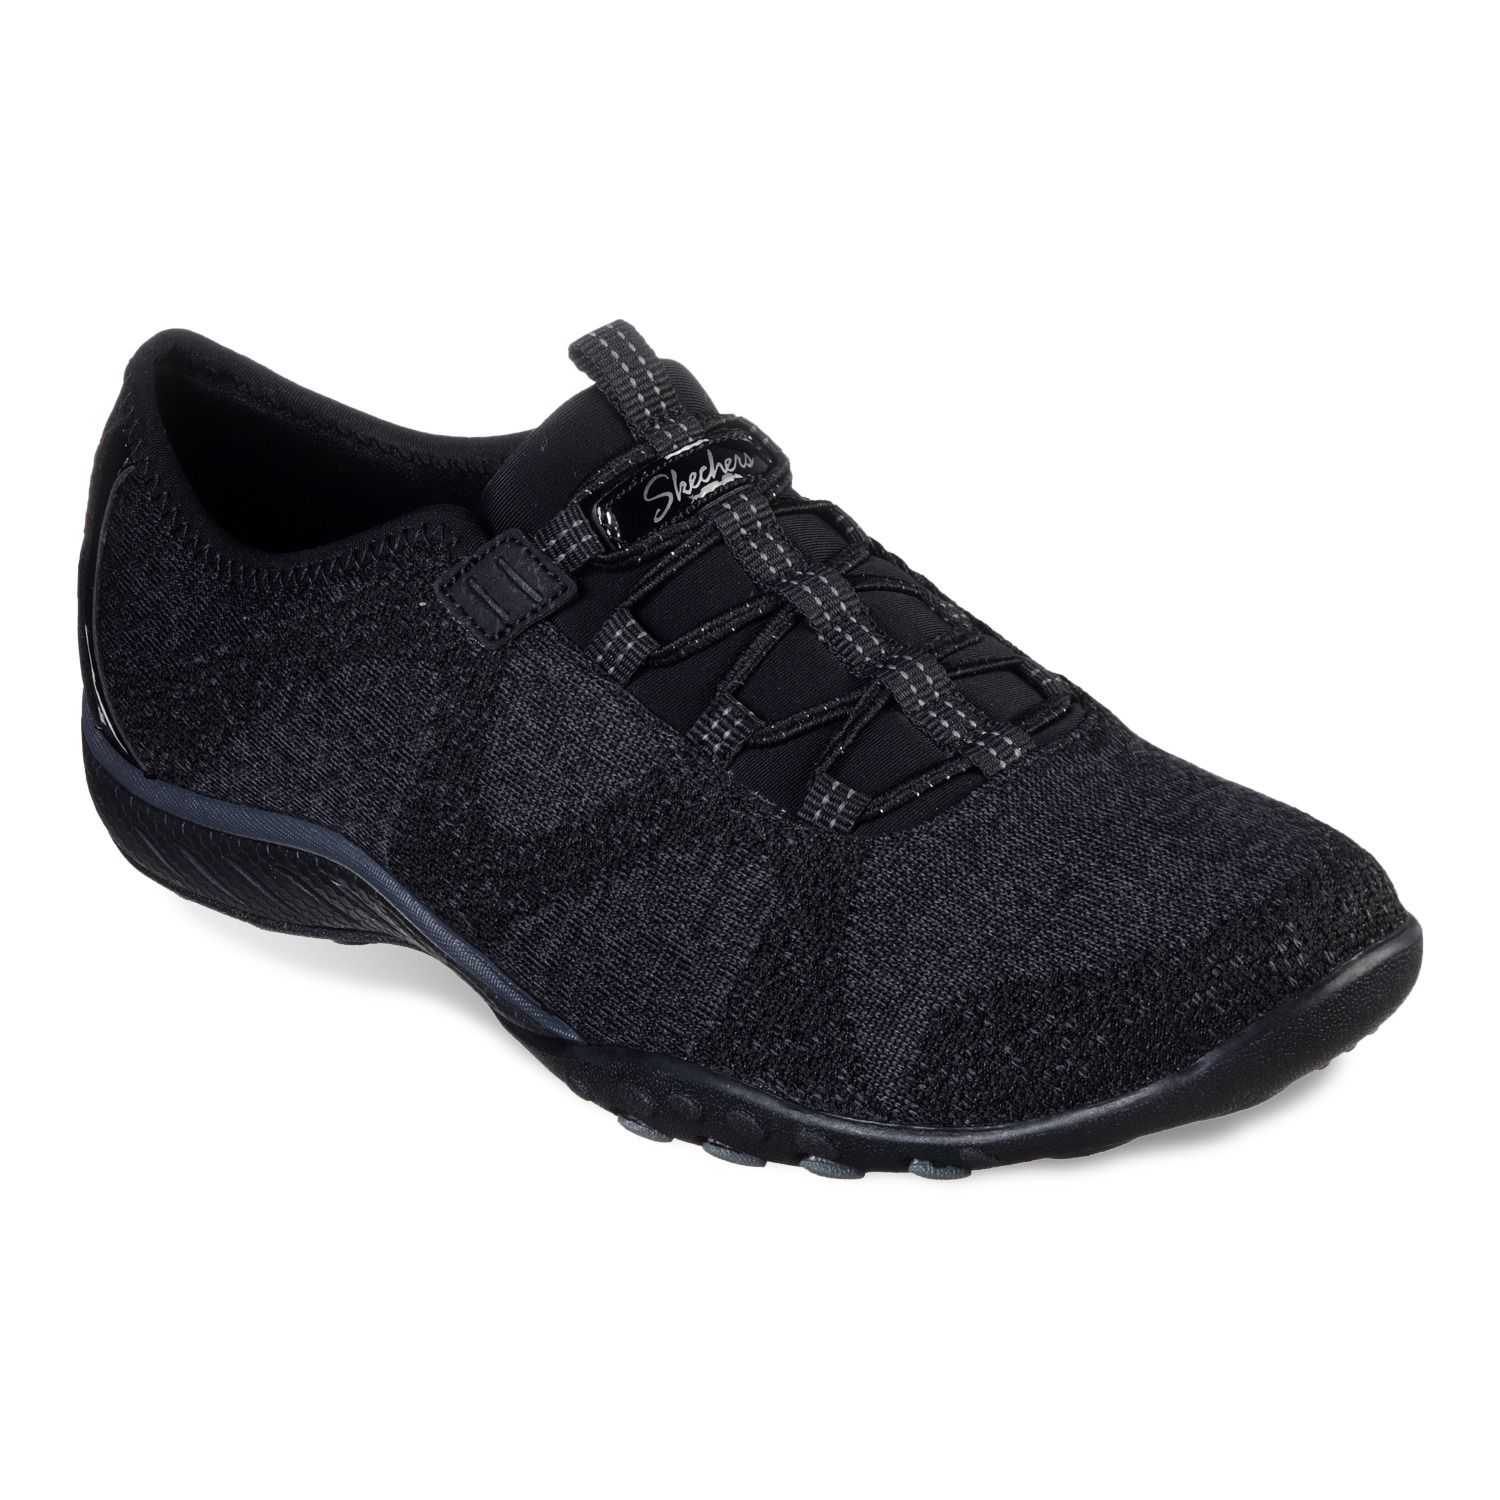 all black athletic shoes womens